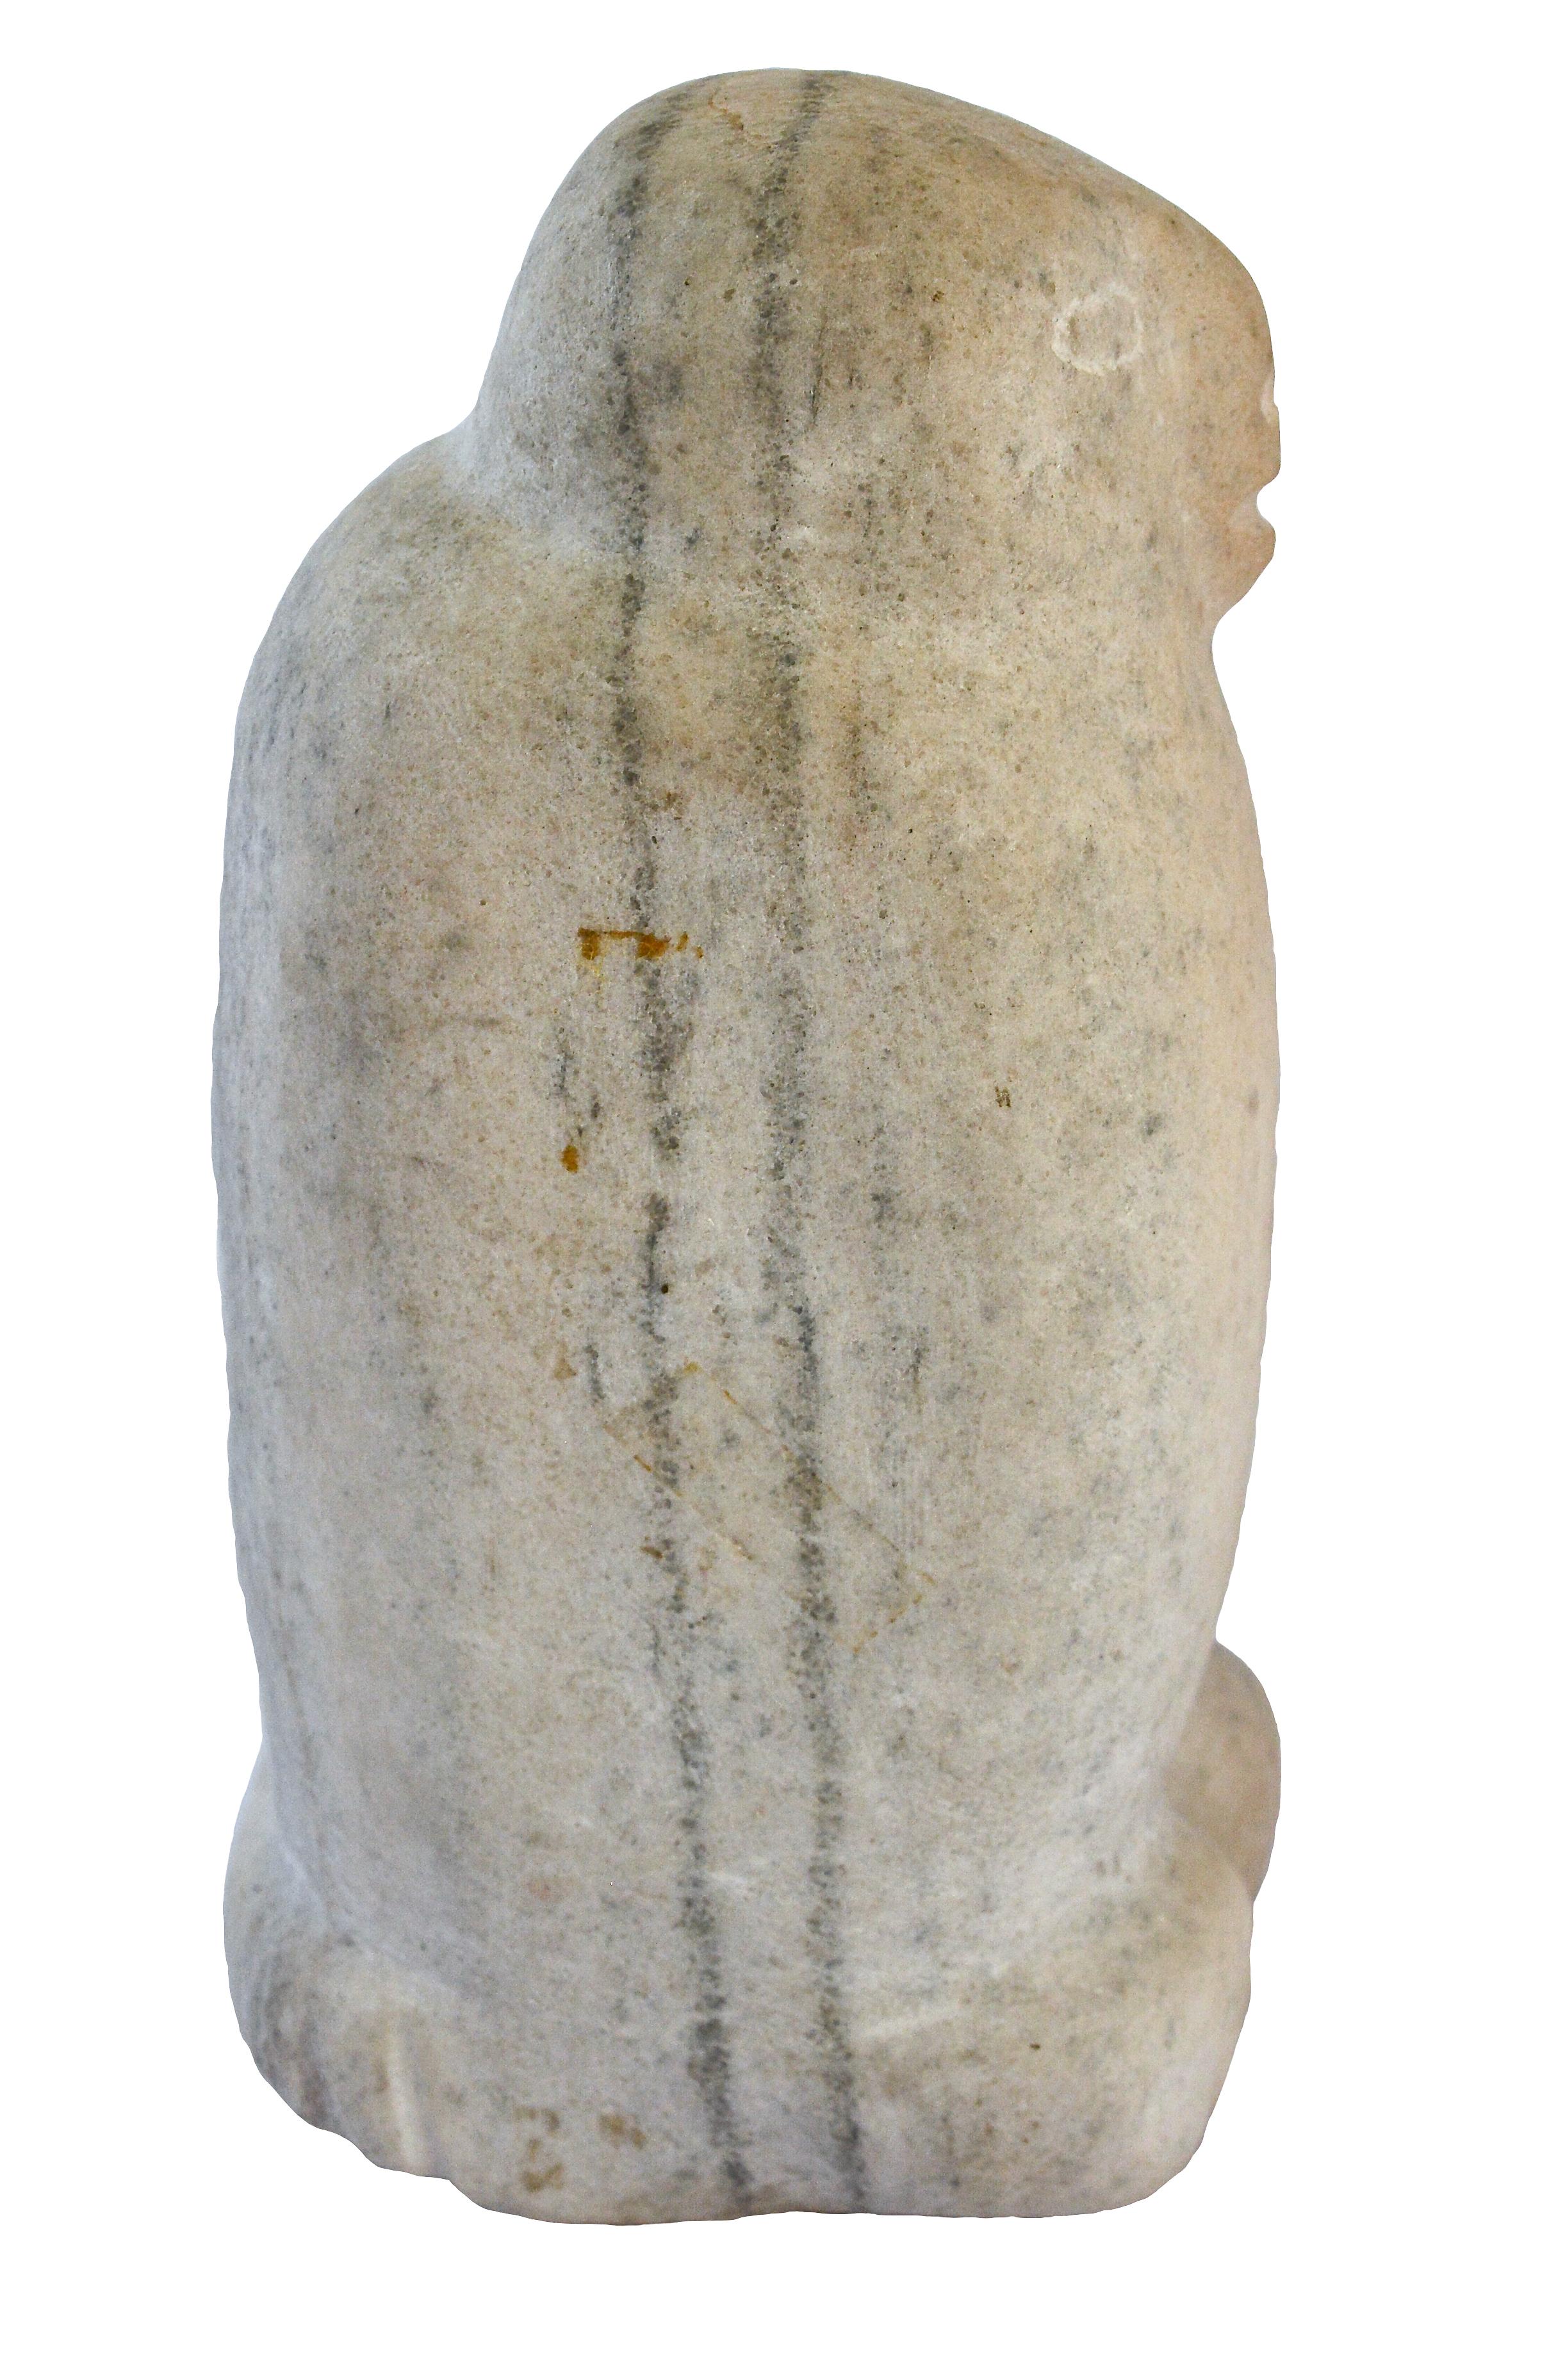 Latcholassie Akesuk (1919 - 2000)
Owl, 1976
Stone sculpture
Cape Dorset

This is a classic example of this renown Cape Dorset artist's work. Some of the finest carvings to come from the north were created in Cape Dorset. Light colored Marble.